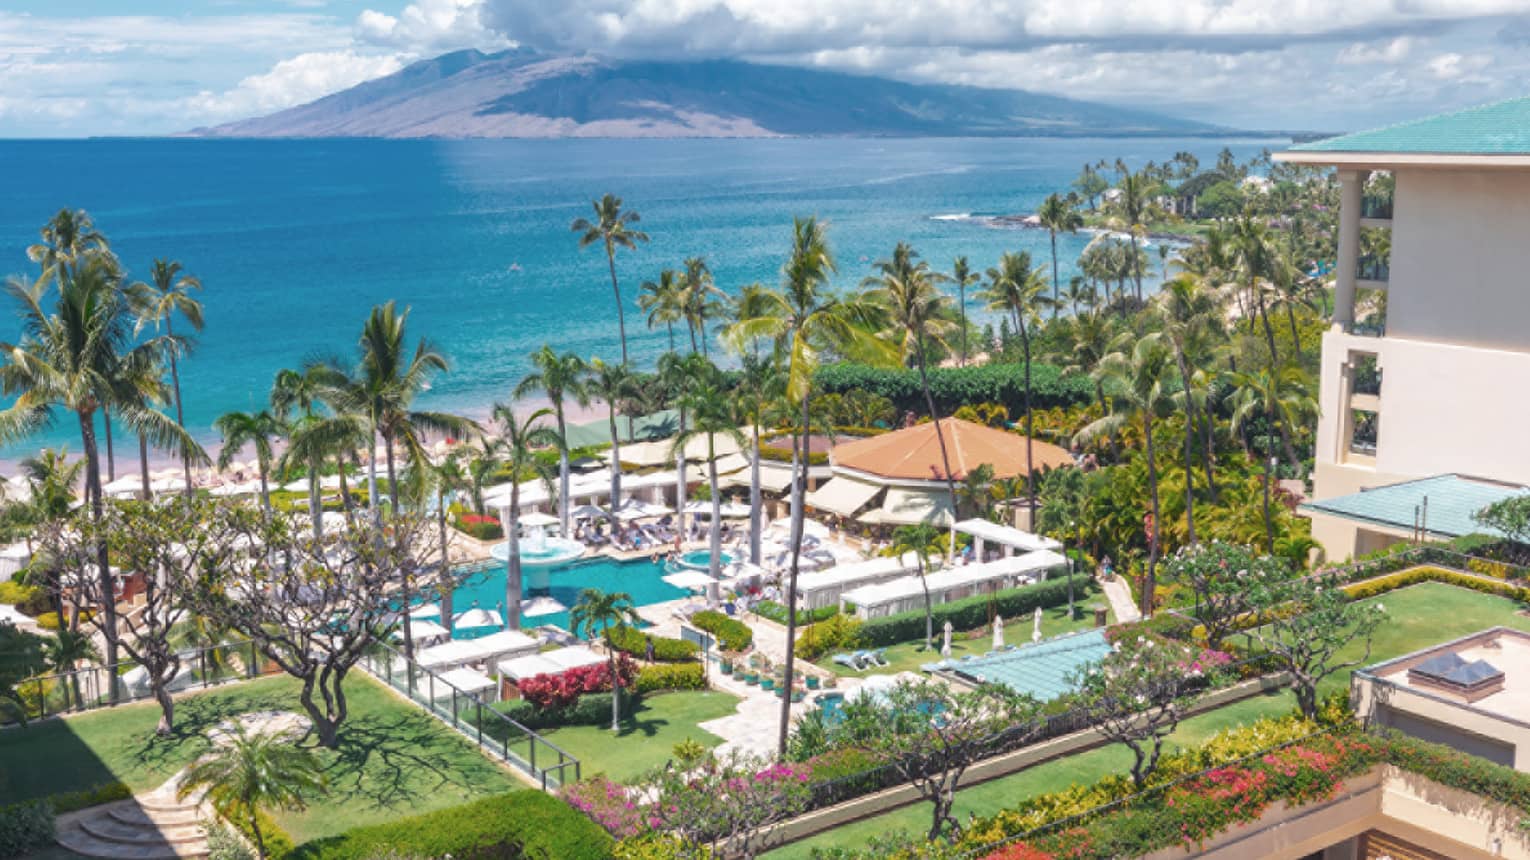 View from a balcony at Maui resort, with view of ocean and resort grounds